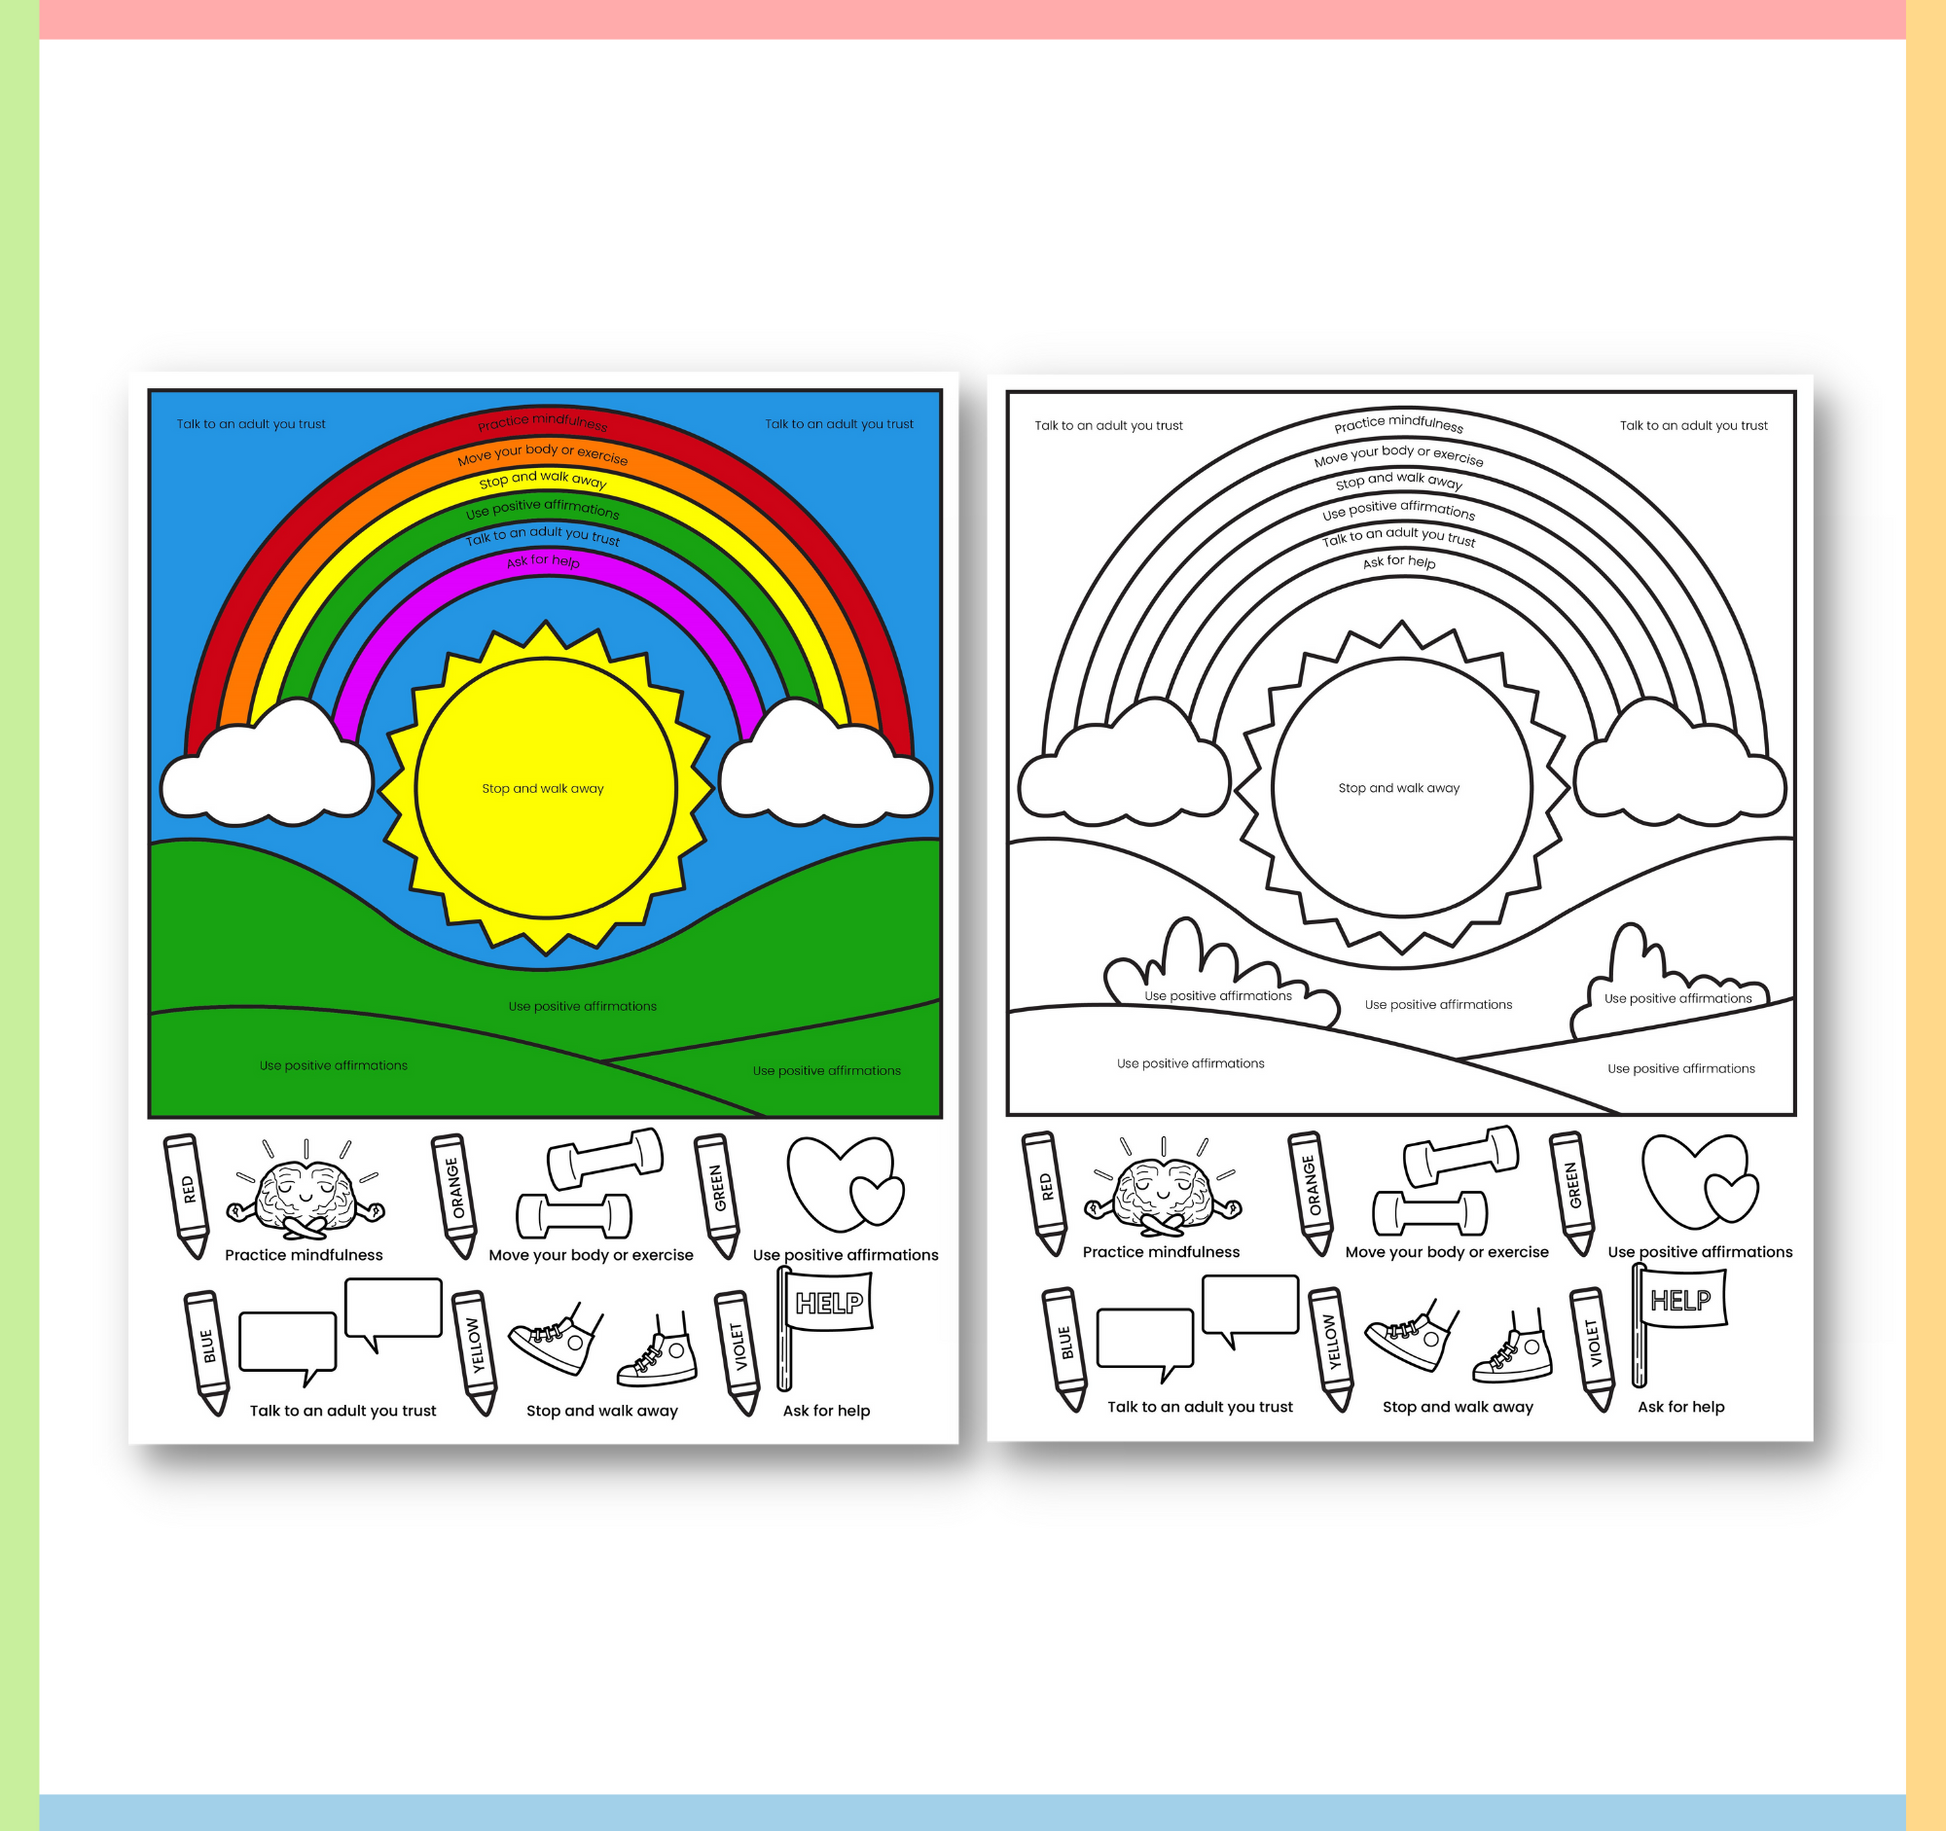 spring coloring pages for kids